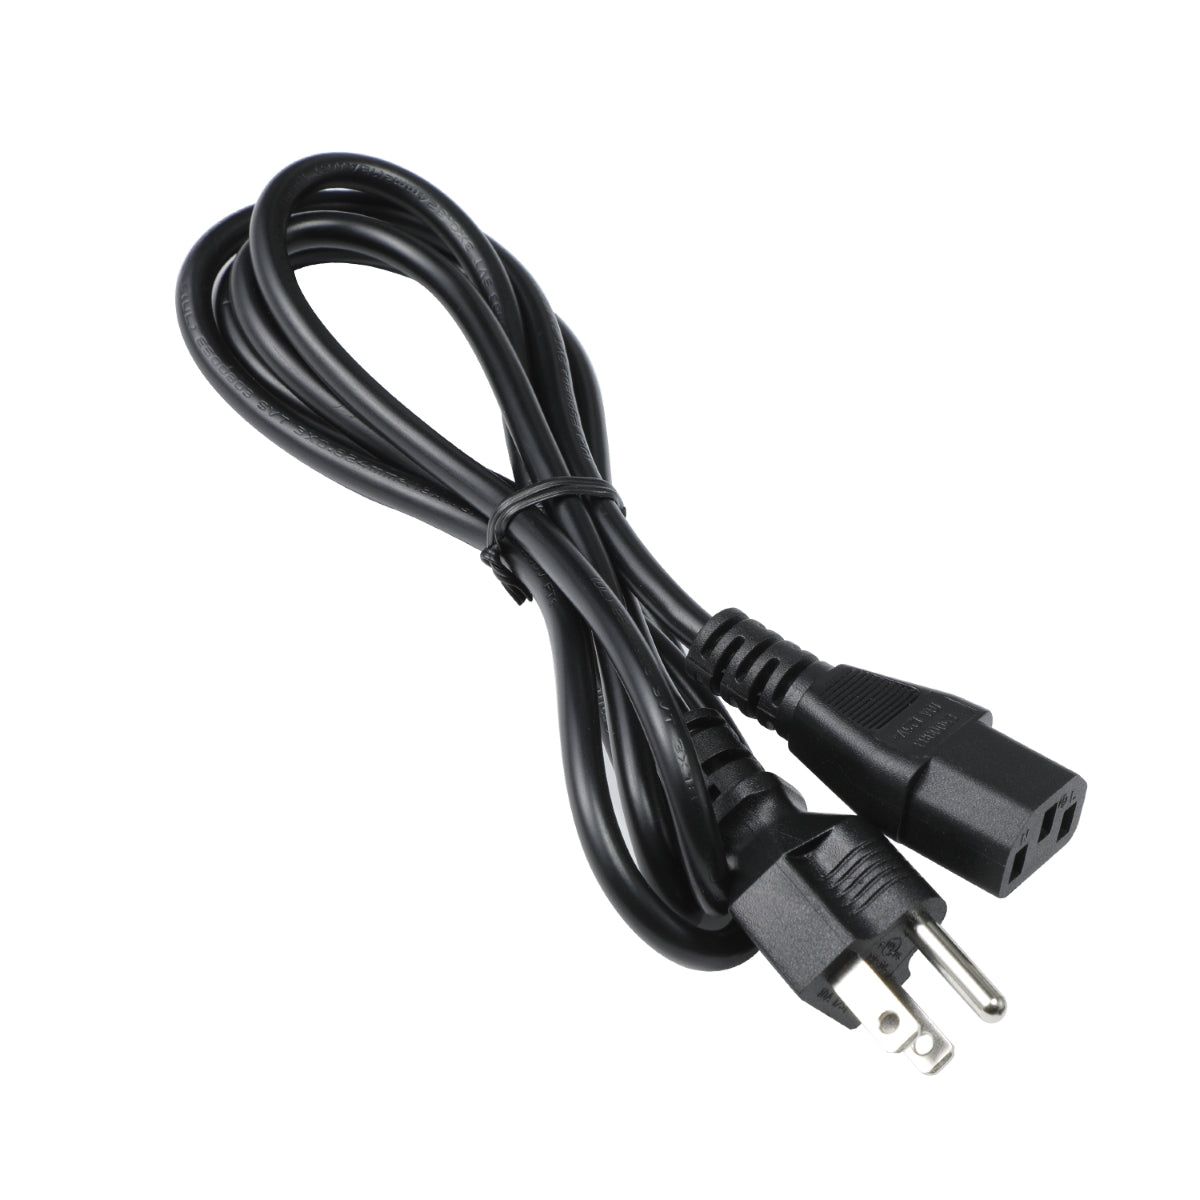 Power Cable for Philips 273V7QJAB/27 Monitor.